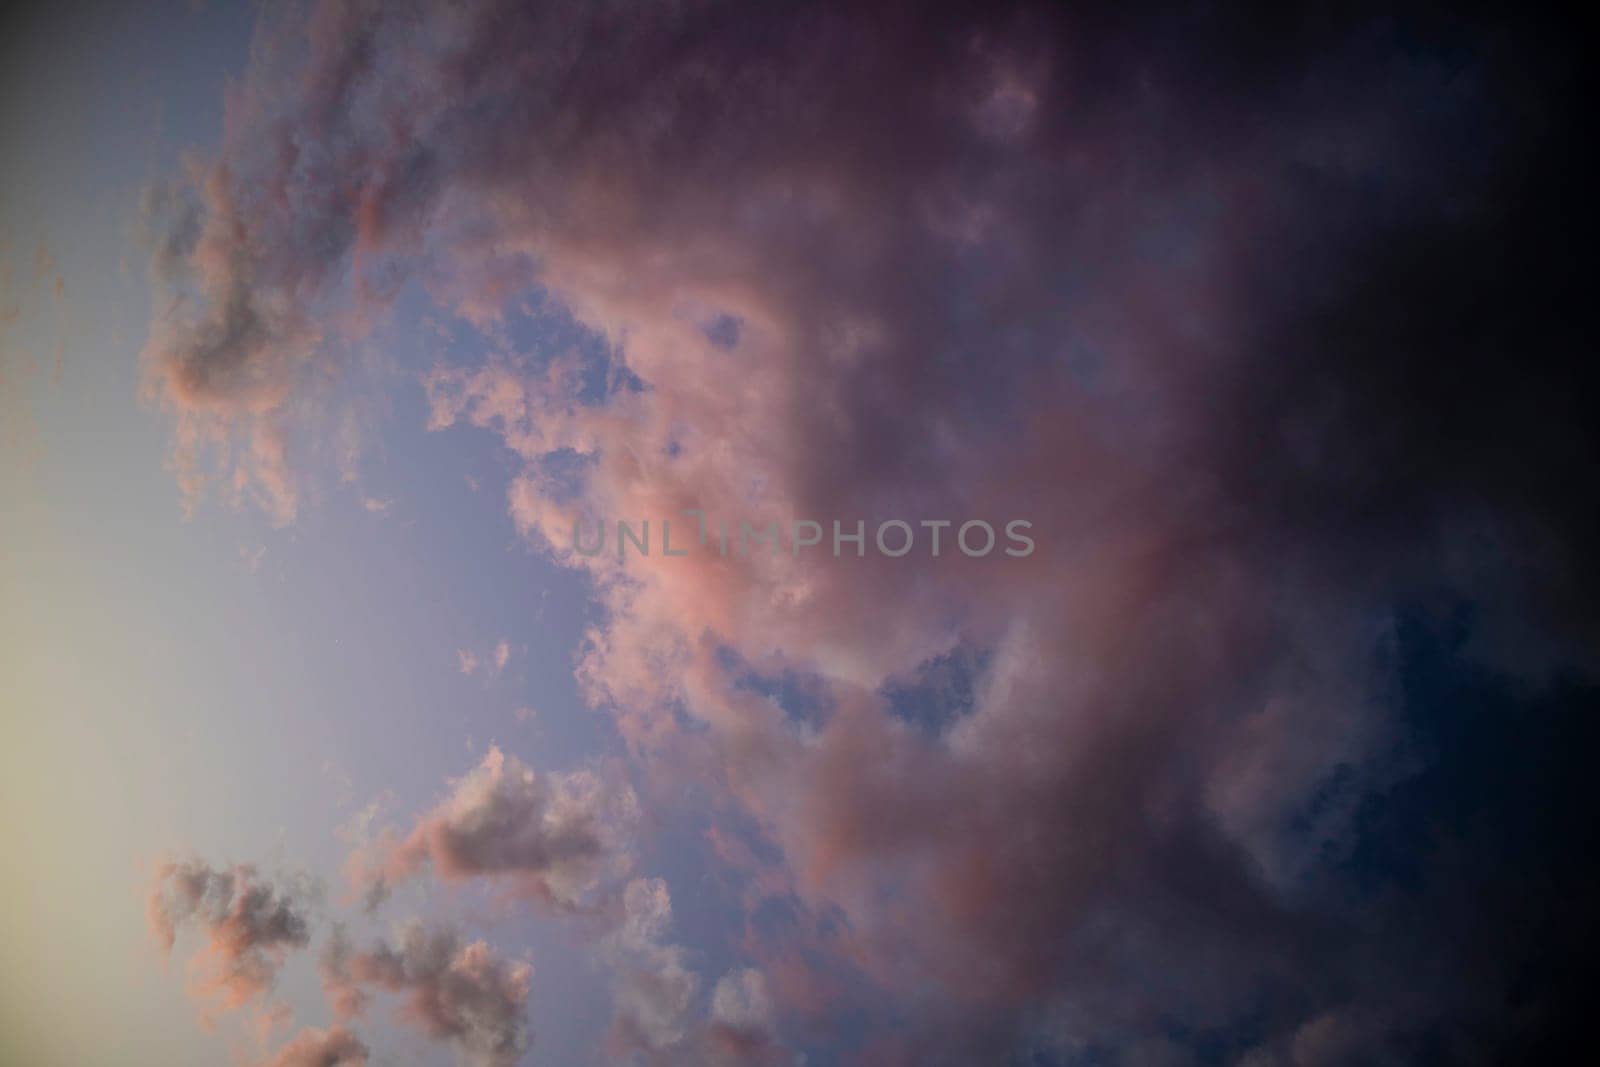 Photographic documentation of a group of colored clouds taken at sunset 